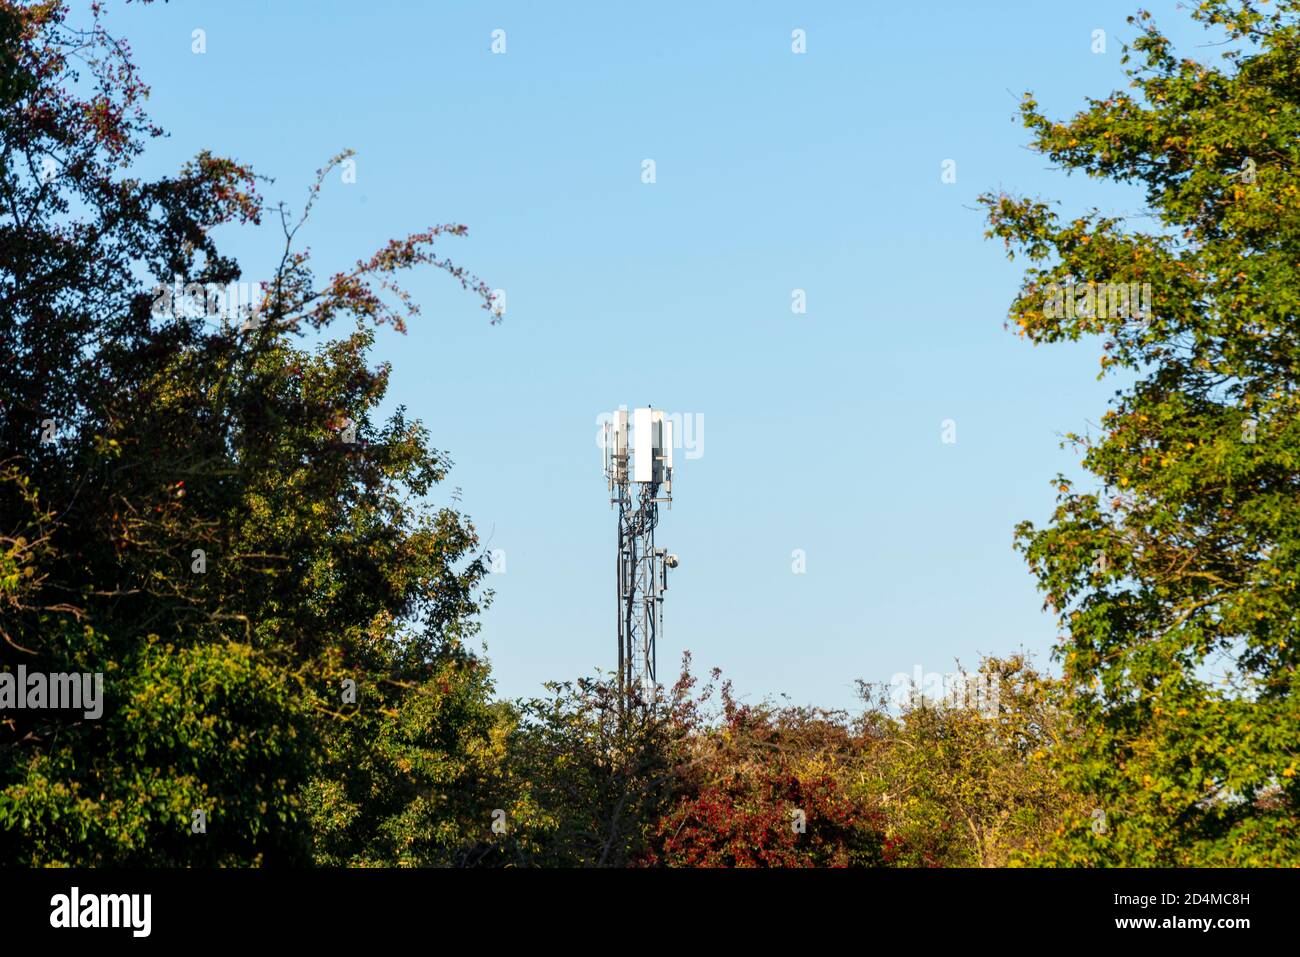 Telecommunications mast in a rural location. Mobile phone mast in Hawkwell, Rochford, Essex, UK. Tower framed by trees Stock Photo